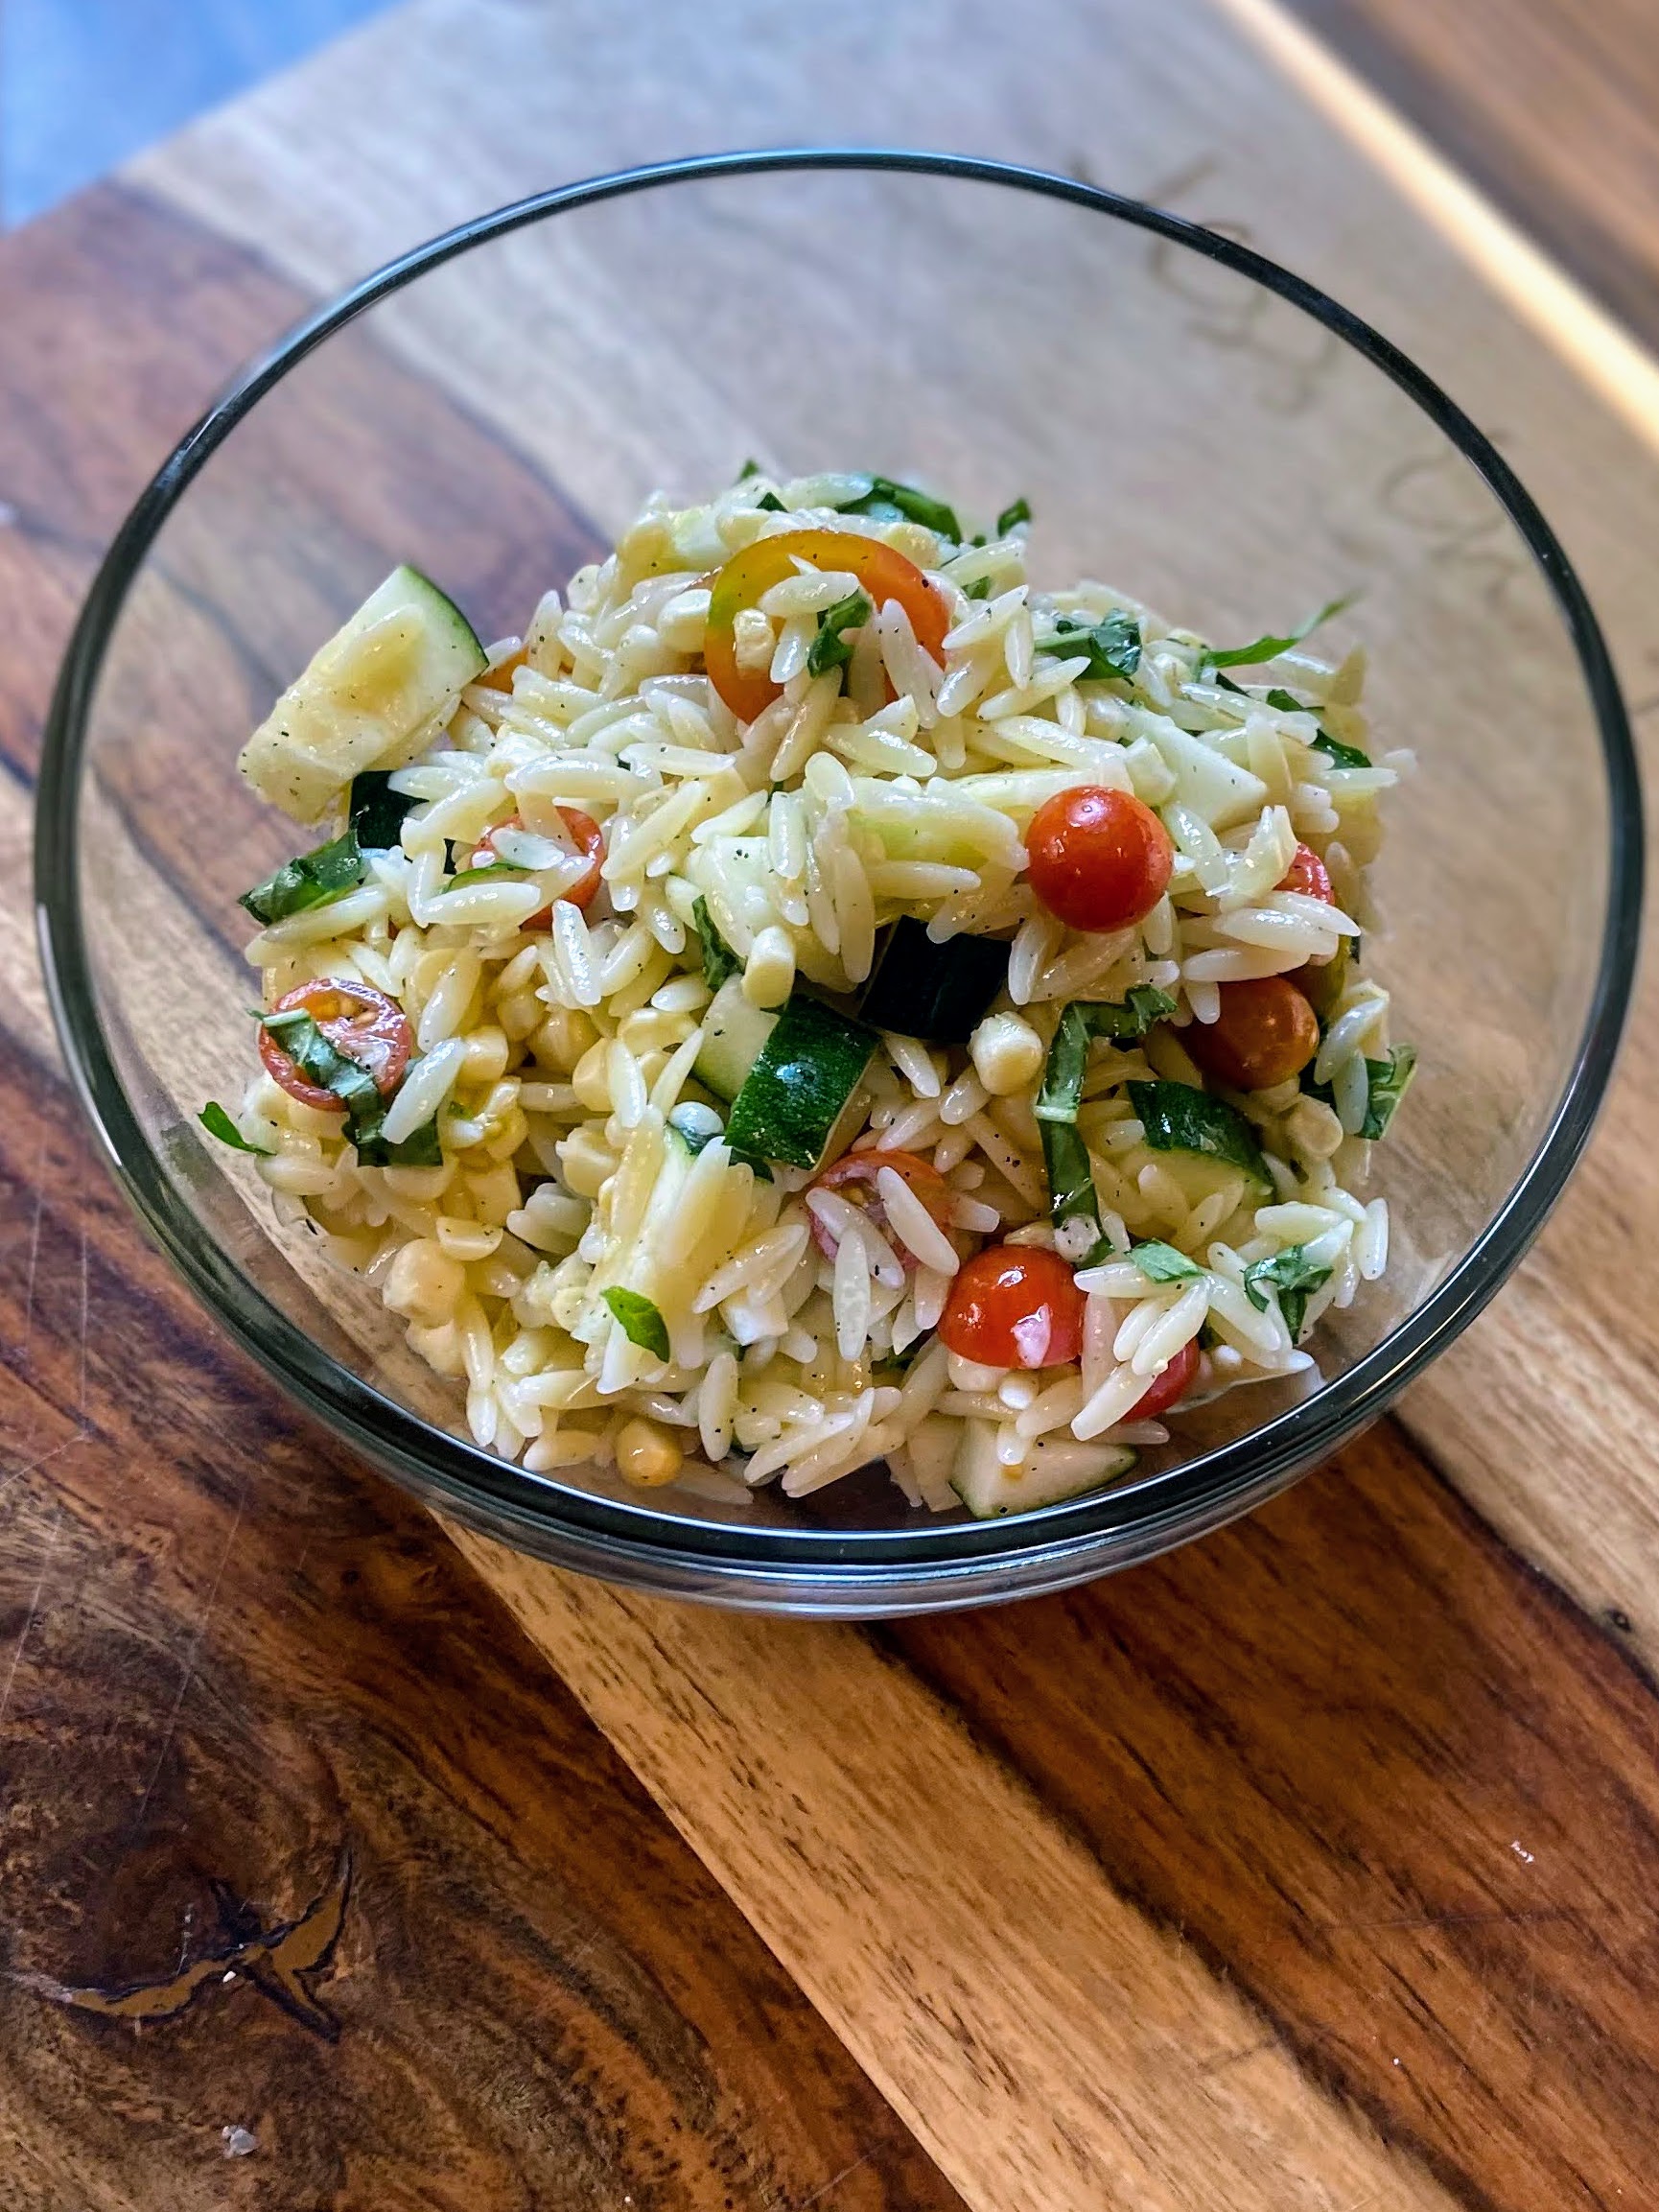 Completed summer garden orzo salad